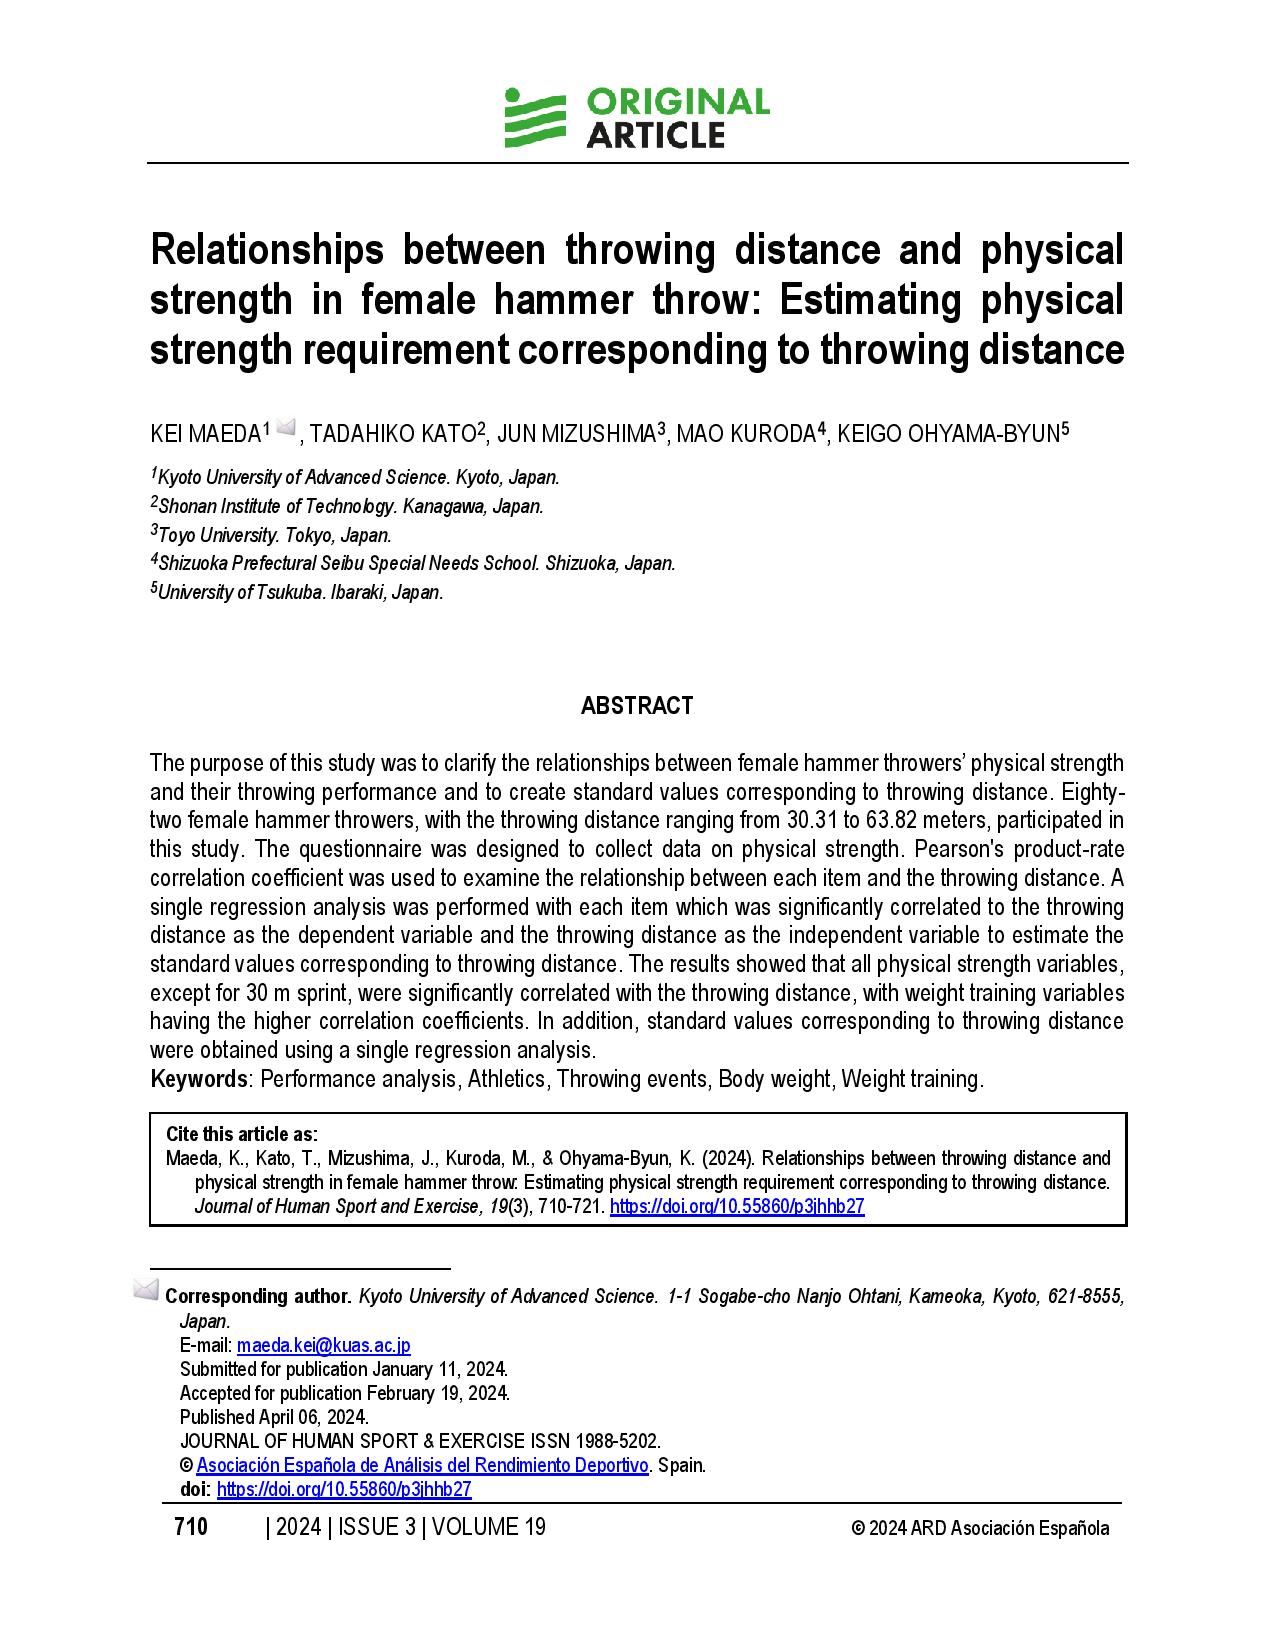 Relationships between throwing distance and physical strength in female hammer throw: Estimating physical strength requirement corresponding to throwing distance